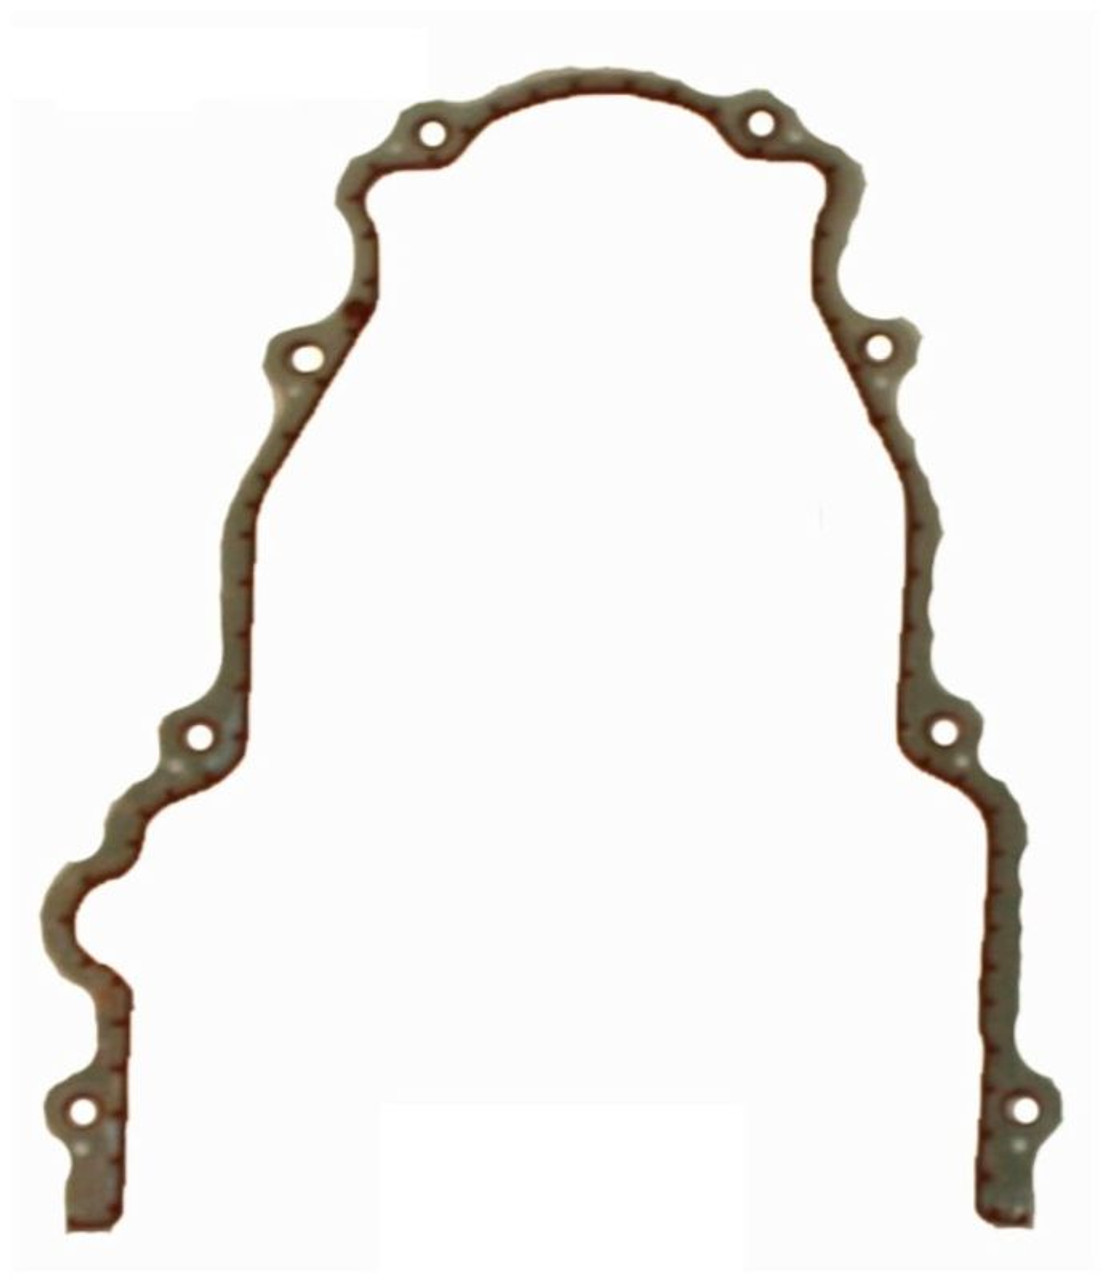 2006 Chevrolet Suburban 1500 5.3L Engine Timing Cover Gasket TCG293-A -341